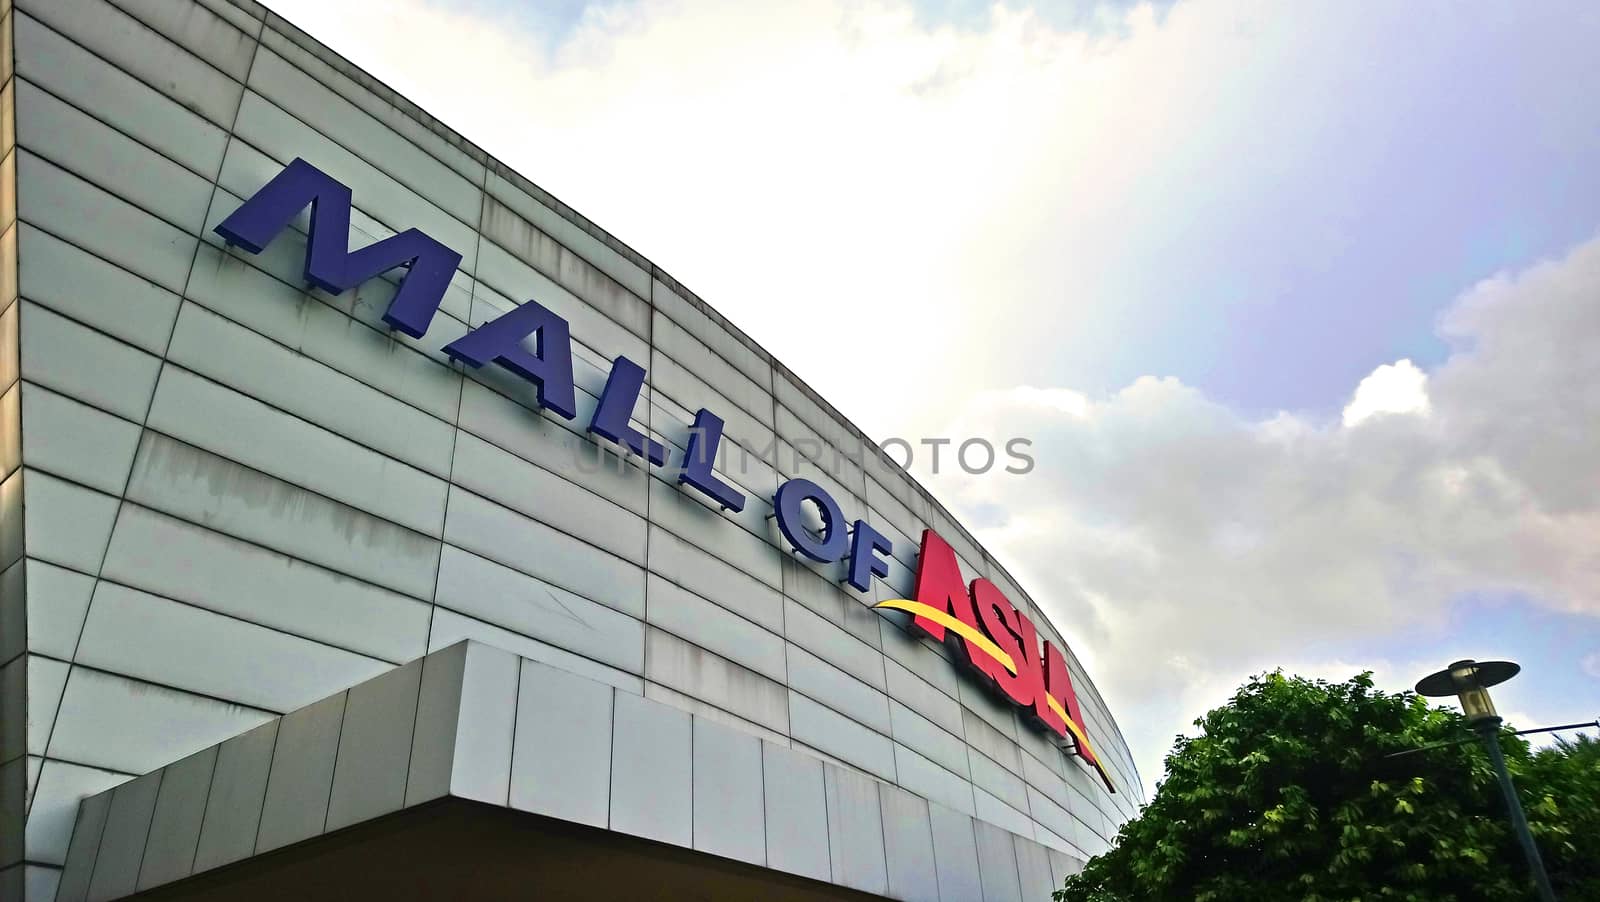 SM Mall of Asia facade in Pasay, Philippines by imwaltersy